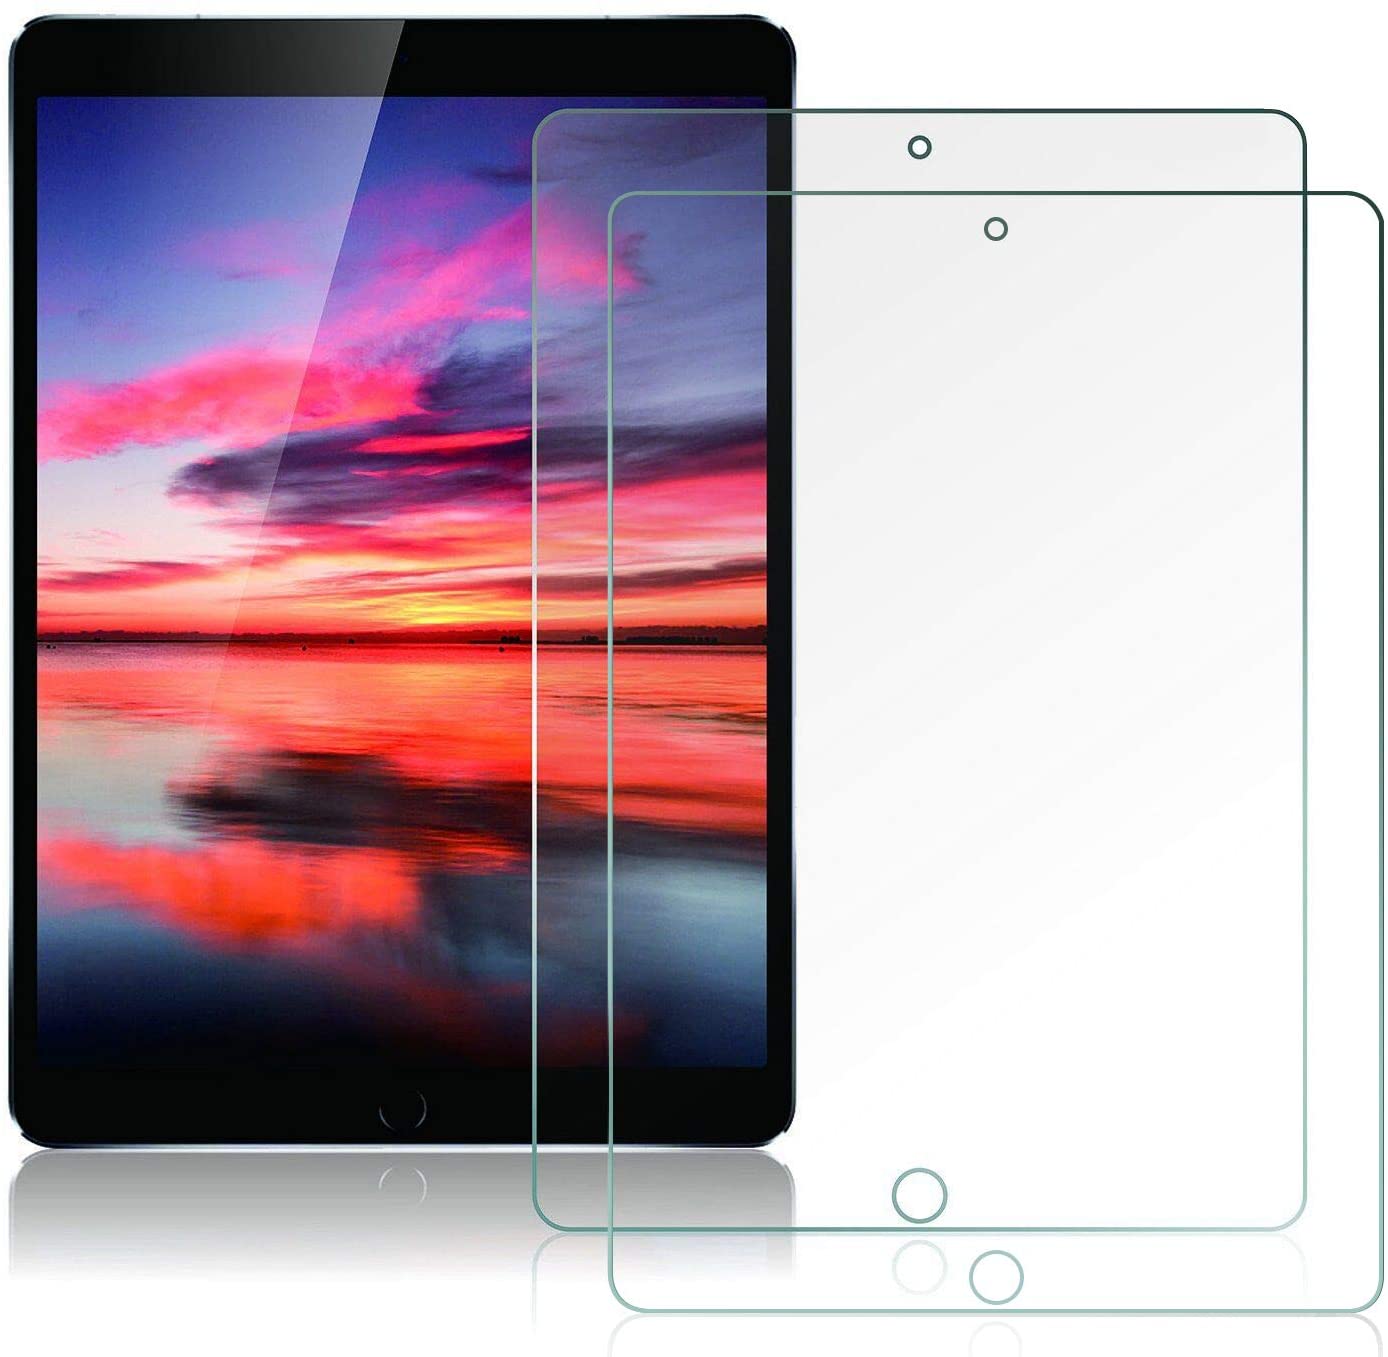 Screen Protector for iPad Air 3 (10.5 Inch 2019 Model) and iPad Pro 10.5 (2017), Tempered Glass Film. - e4cents